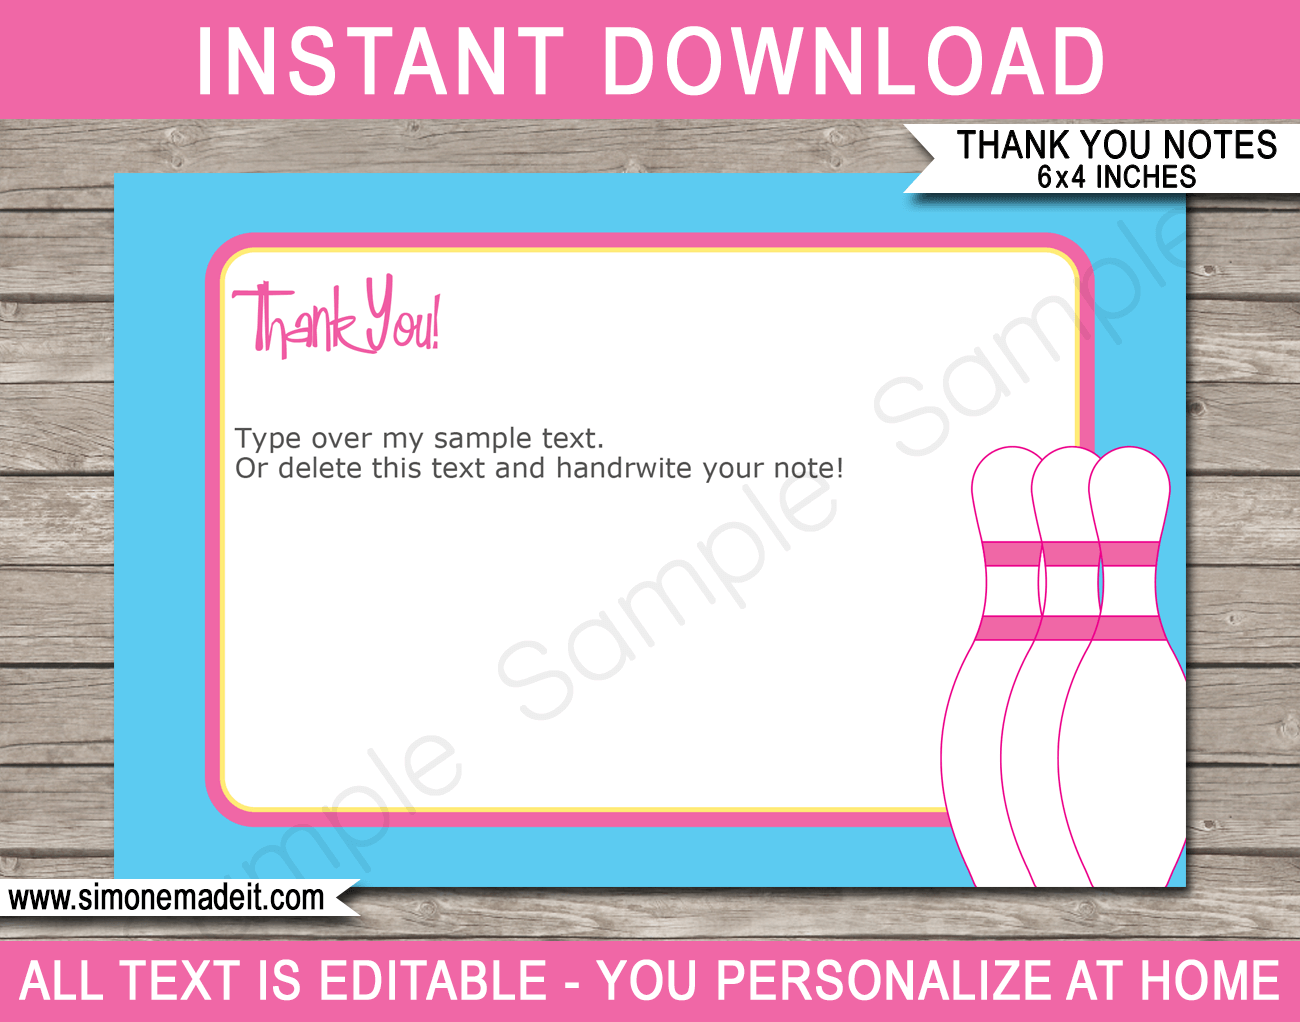 Printable Bowling Birthday Party Thank You Cards - Favor Tags - Bowling Party theme - Retro Ten Pin Bowling Party - pink & blue - Editable Template - Instant Download via simonemadeit.com